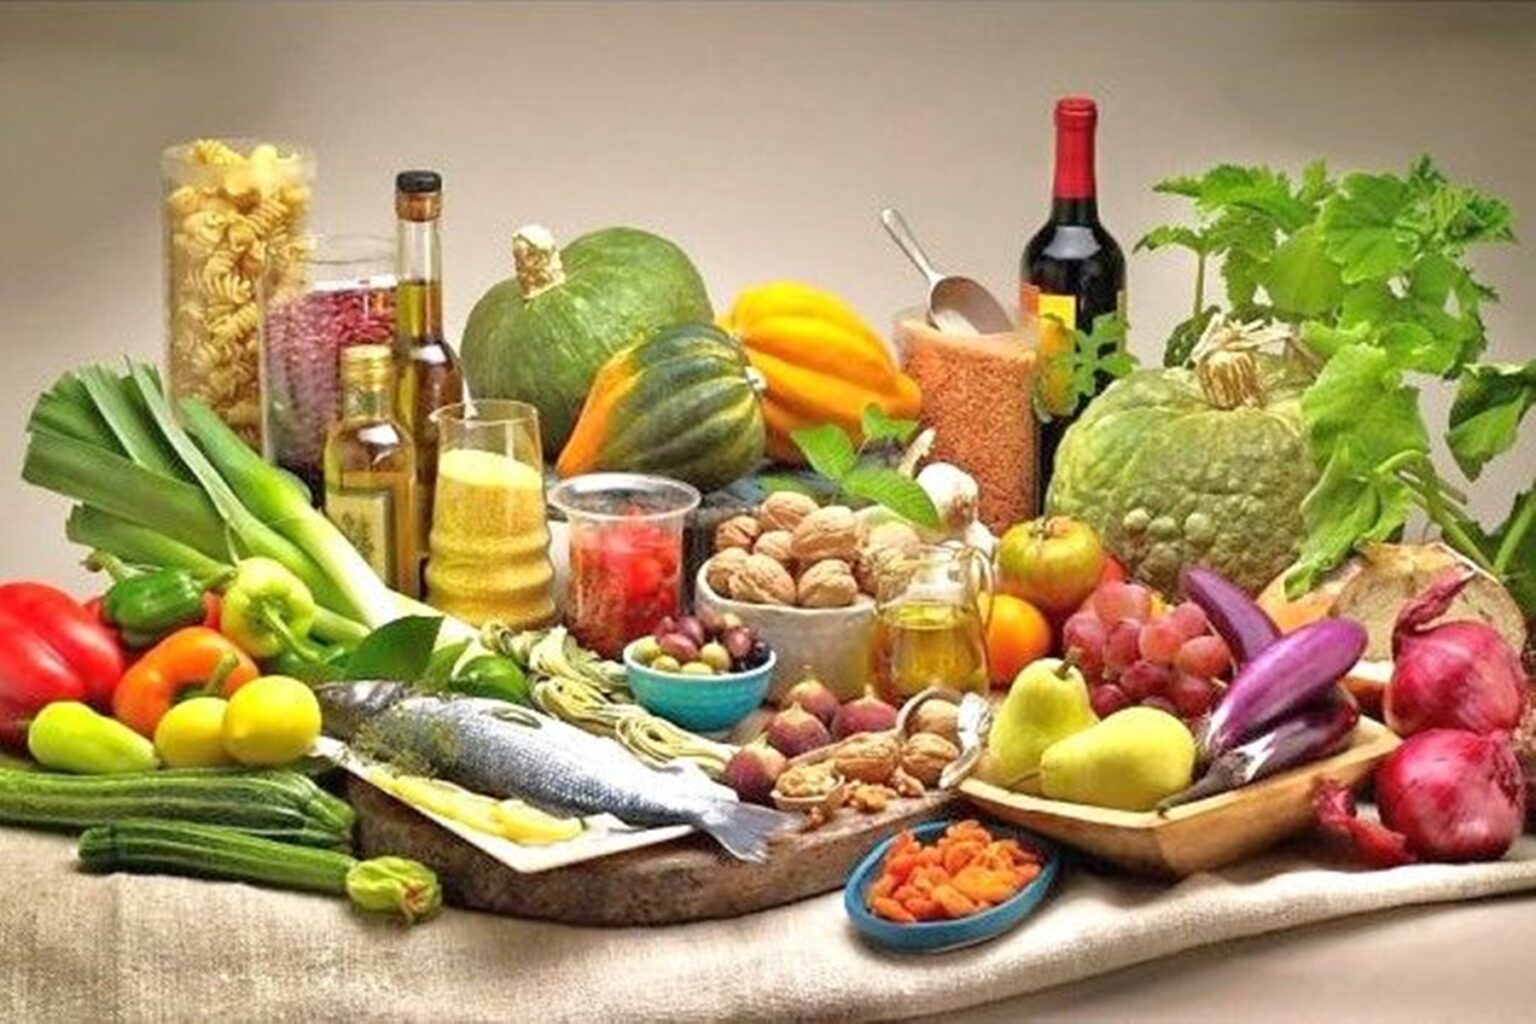 Asia Pacific Functional Food Ingredients Market Size Forecast to Reach USD 8,141.5 Mn by 2032|FMI